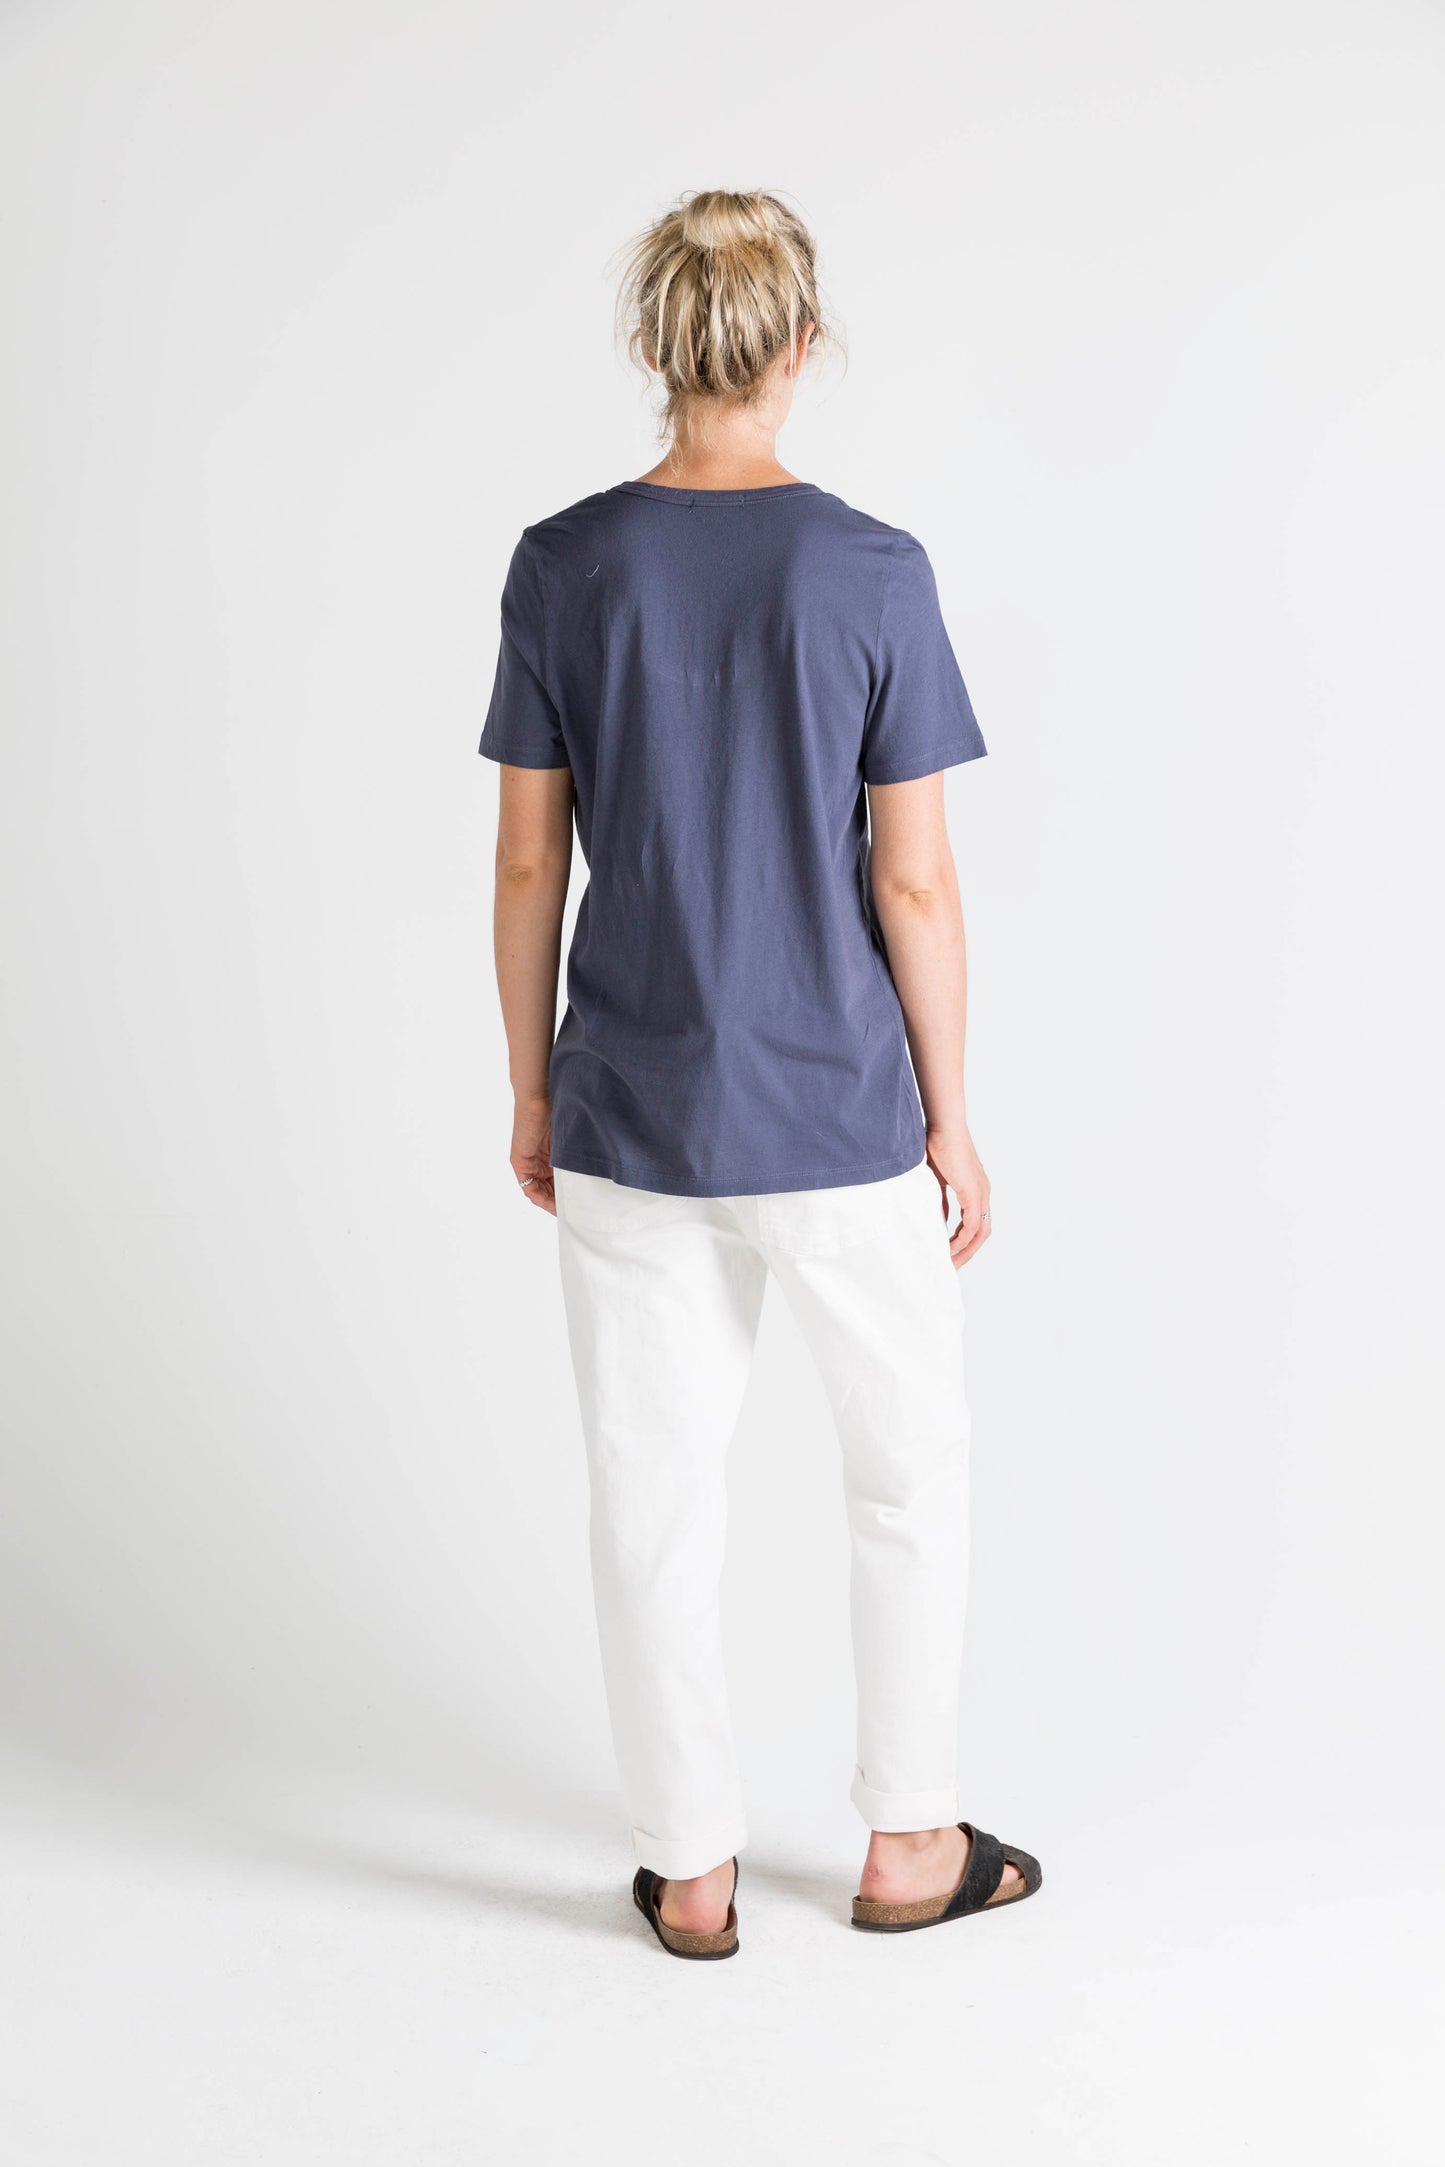 Ophelia and Ryder Navy T-Shirt